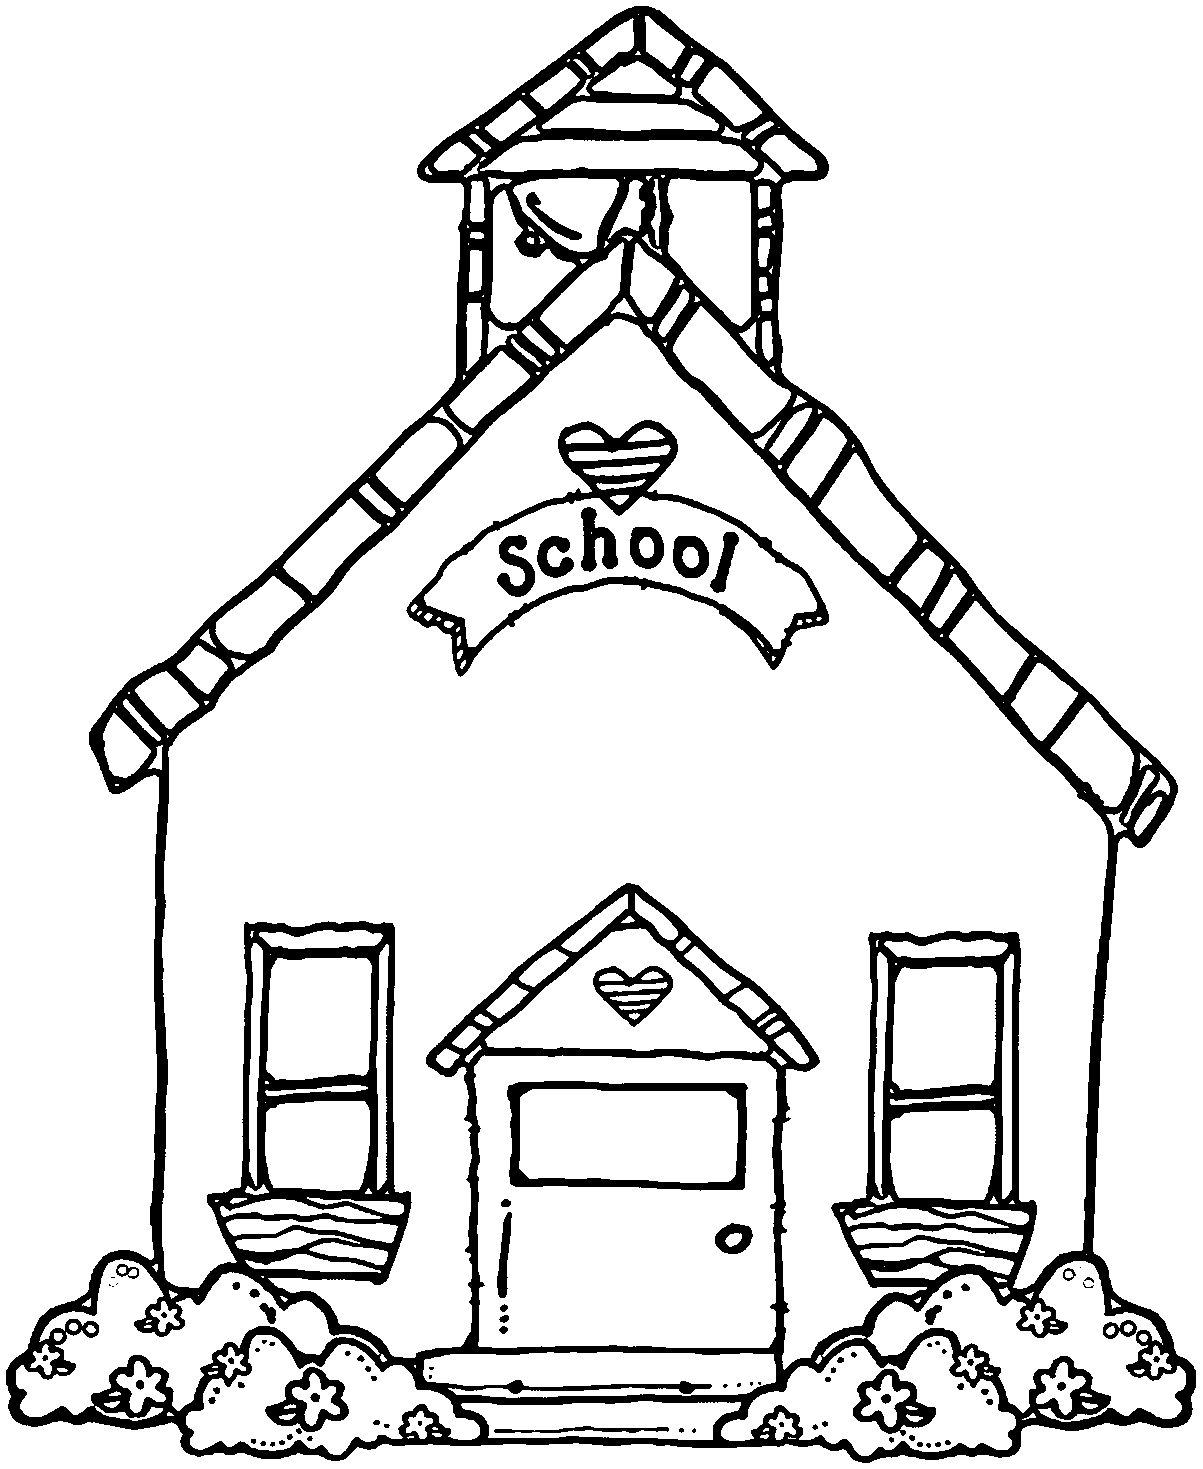 free clip art of a school house - photo #39